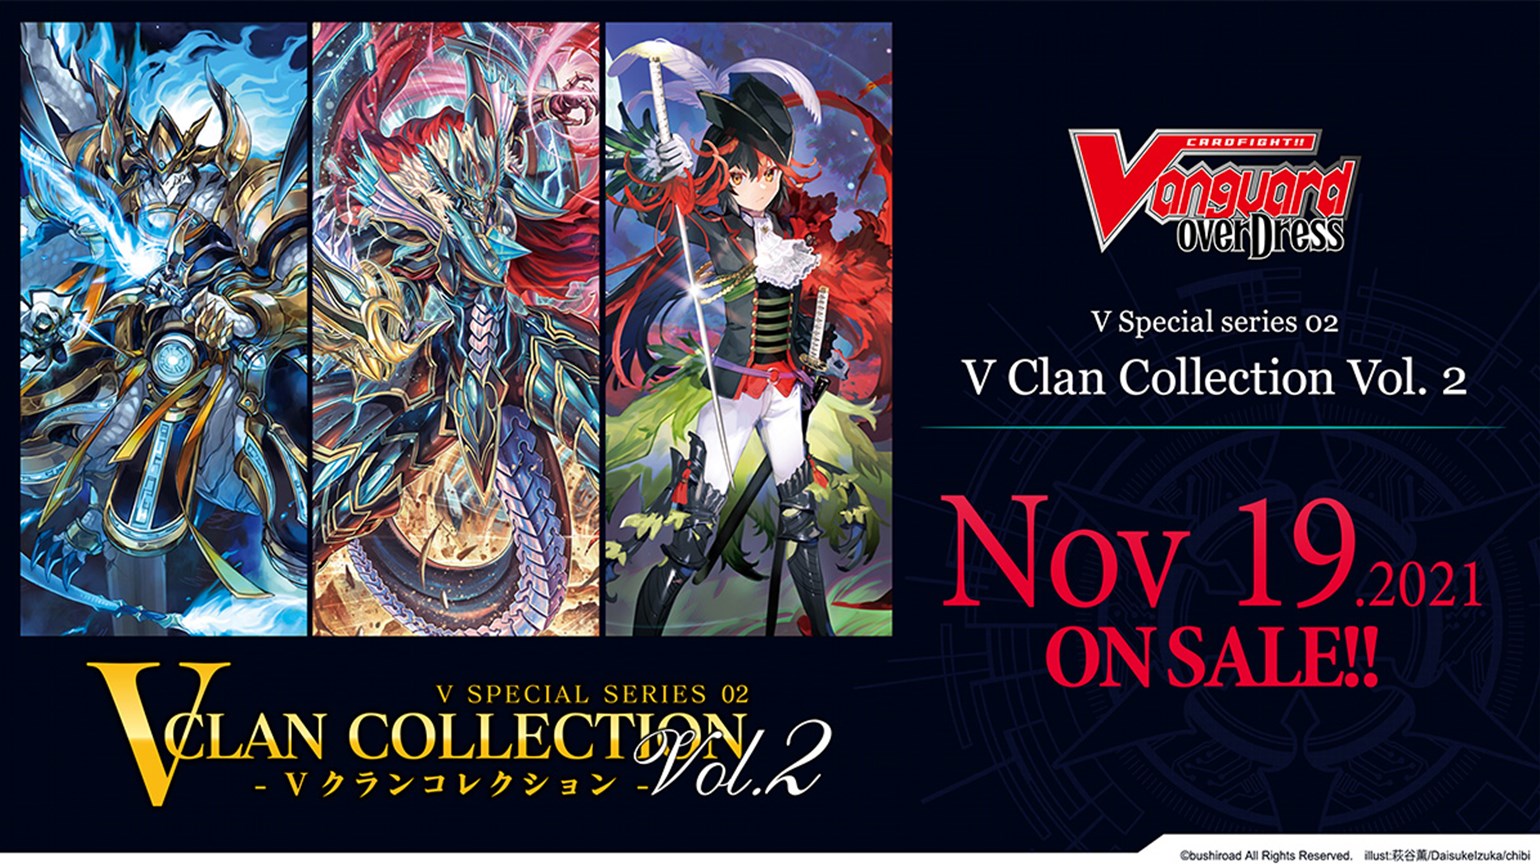 New English Edition overDress V Special Series 02: V Clan Collection Vol.2, Coming to Stores on November 19th!